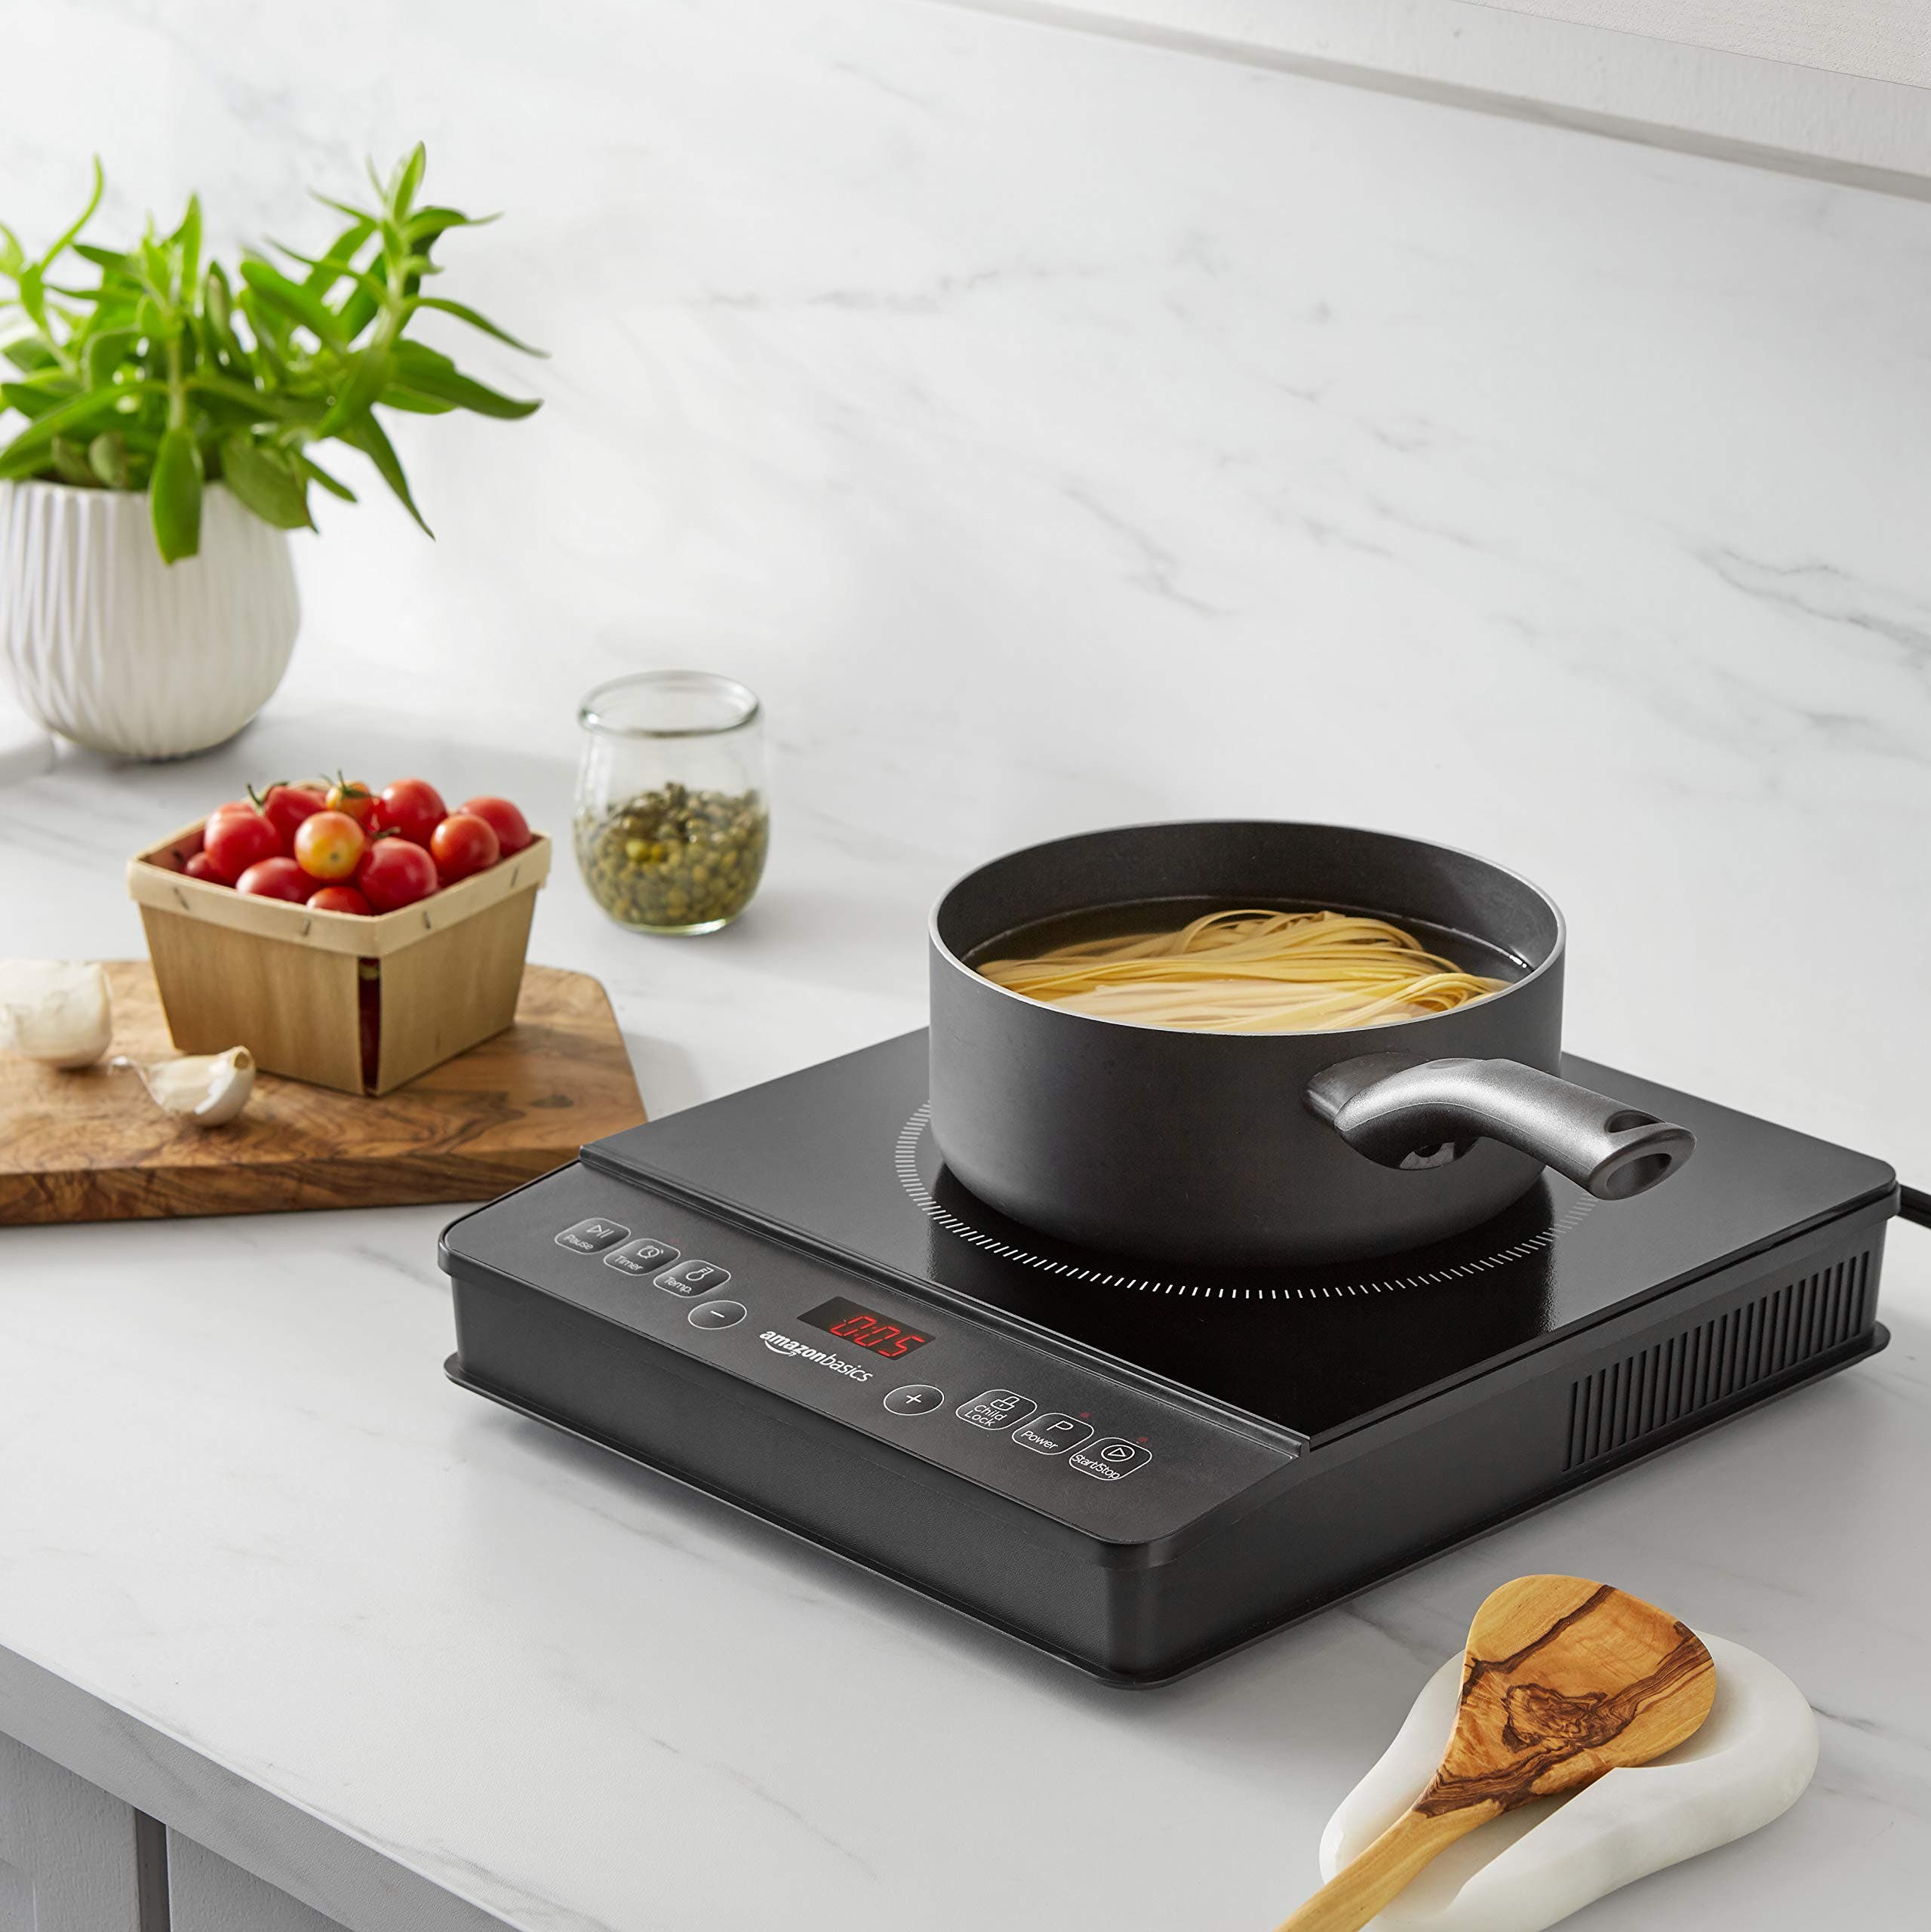 Portable Induction Cooktop, High End Full Glass Induction Burner